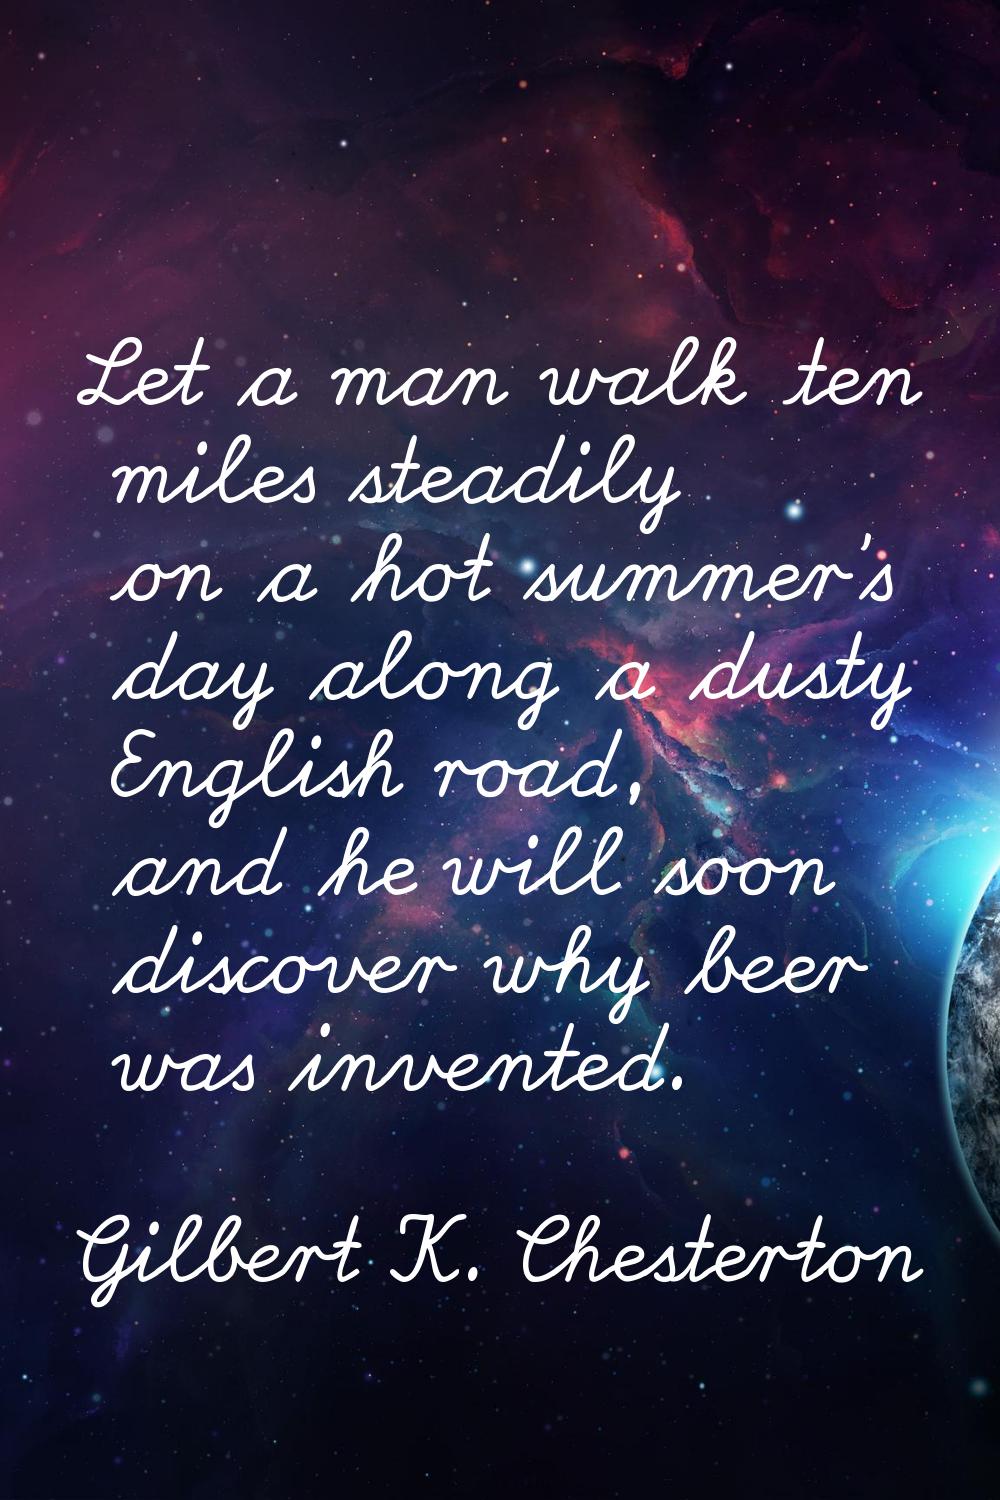 Let a man walk ten miles steadily on a hot summer's day along a dusty English road, and he will soo